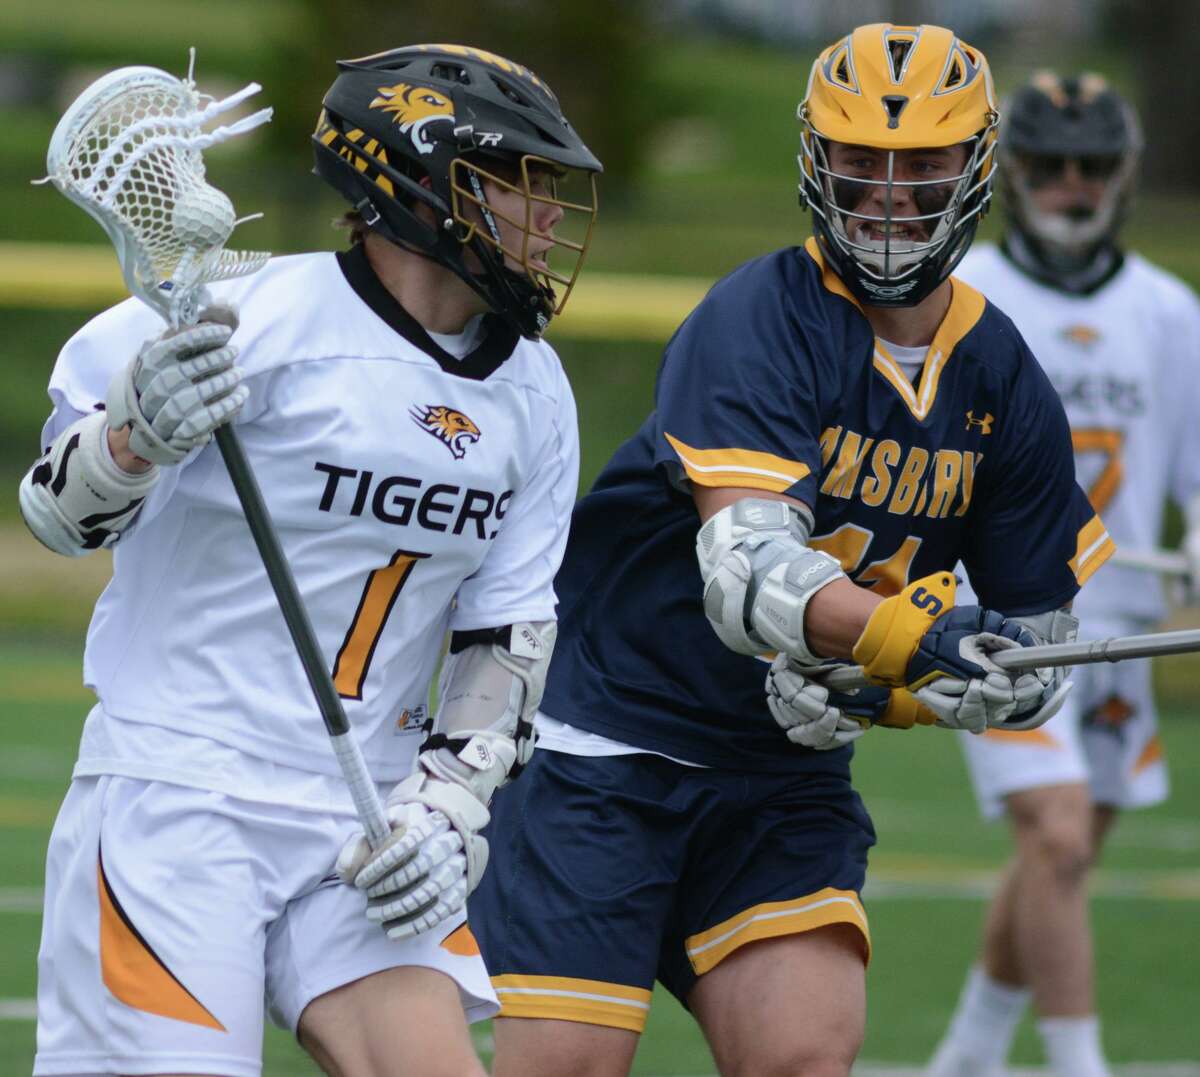 Hand's Sam Sisk scored four goals and assisted on four others as the Tigers pulled away from St. Joseph 15-9 in Class M.